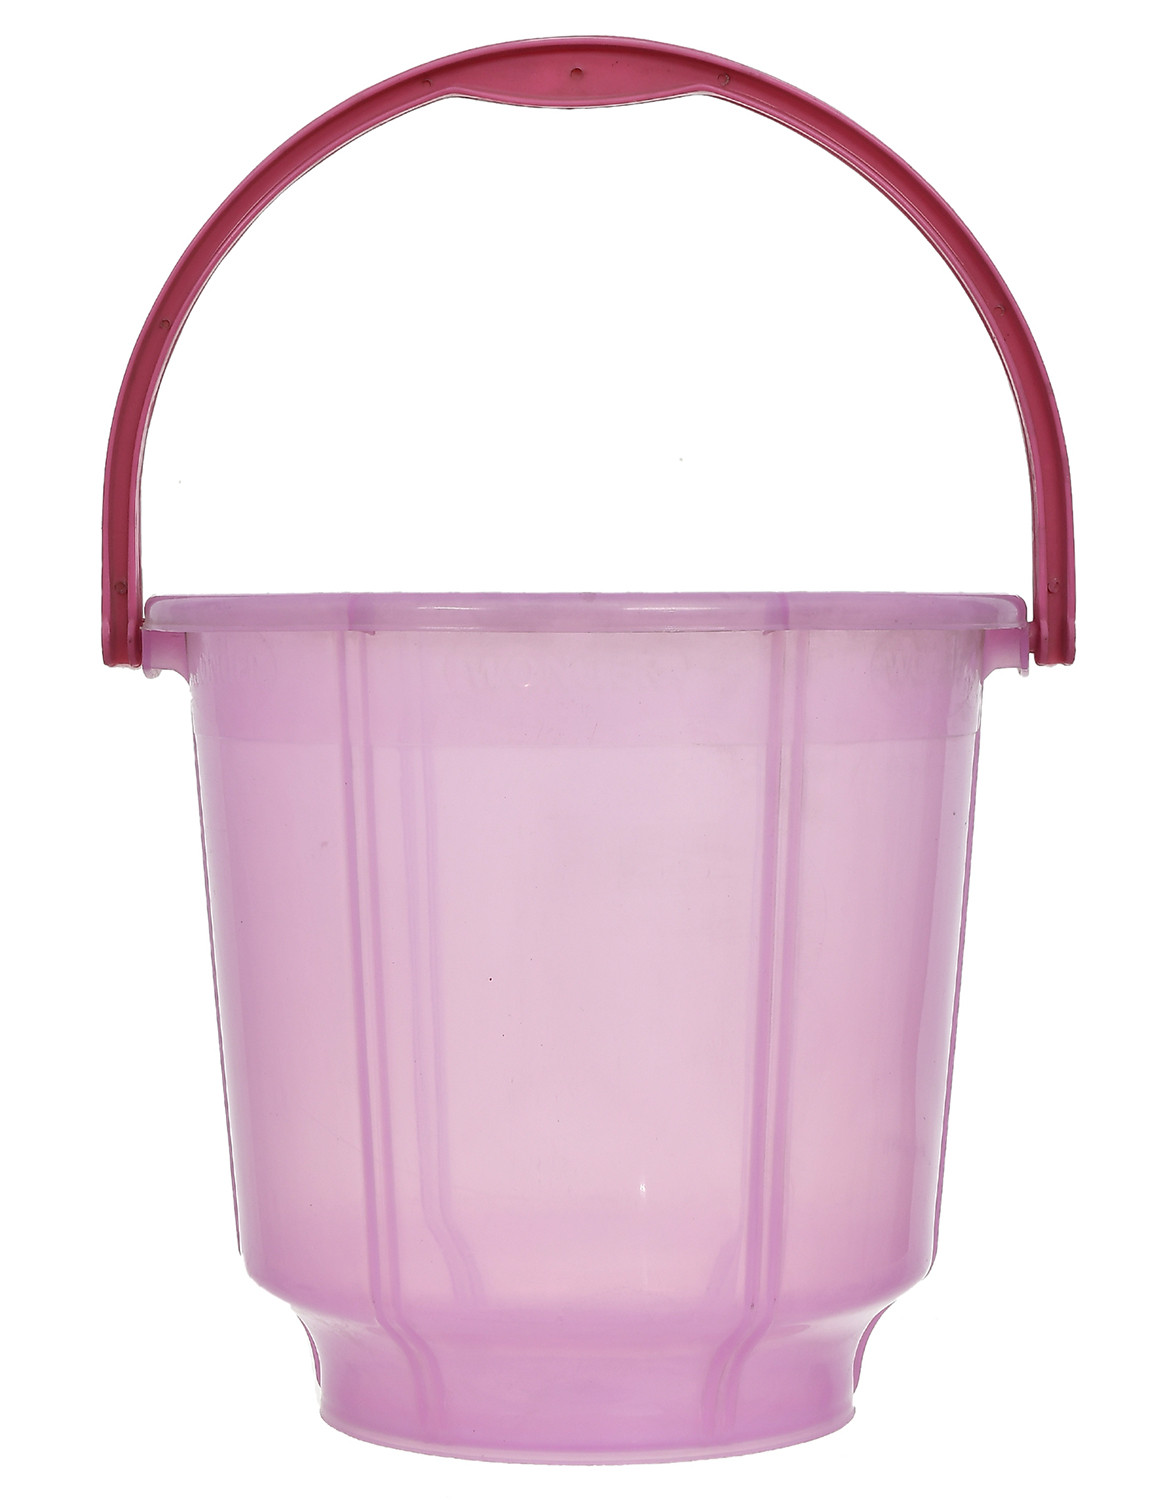 Kuber Industries Multipurposes Tranasparent Plastic Bucket For Bathing Home Cleaning & Storage Purpose, 13Ltr. (Pink)-47KM01213